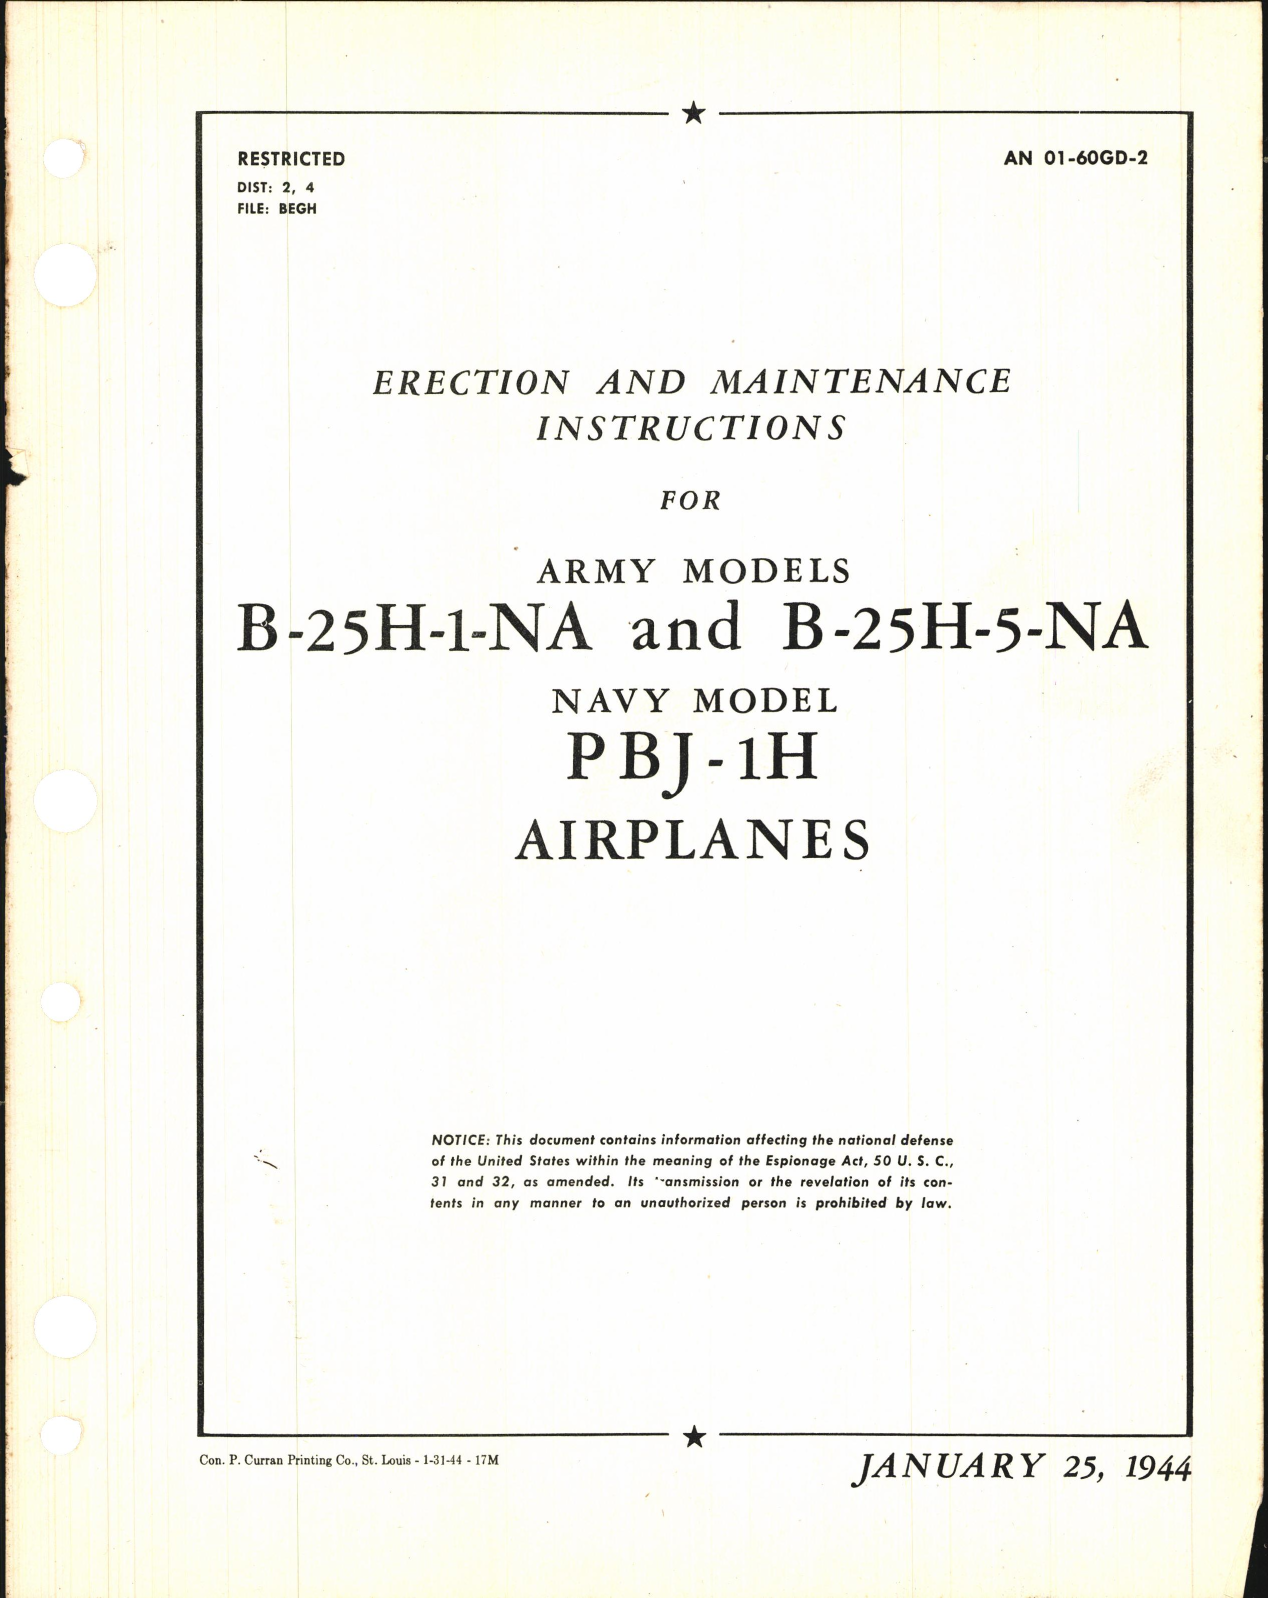 Sample page 1 from AirCorps Library document: Erection and Maintenance Instructions for B-25H-1-NA, B-25H-5-NA, and PBJ-1H Airplanes